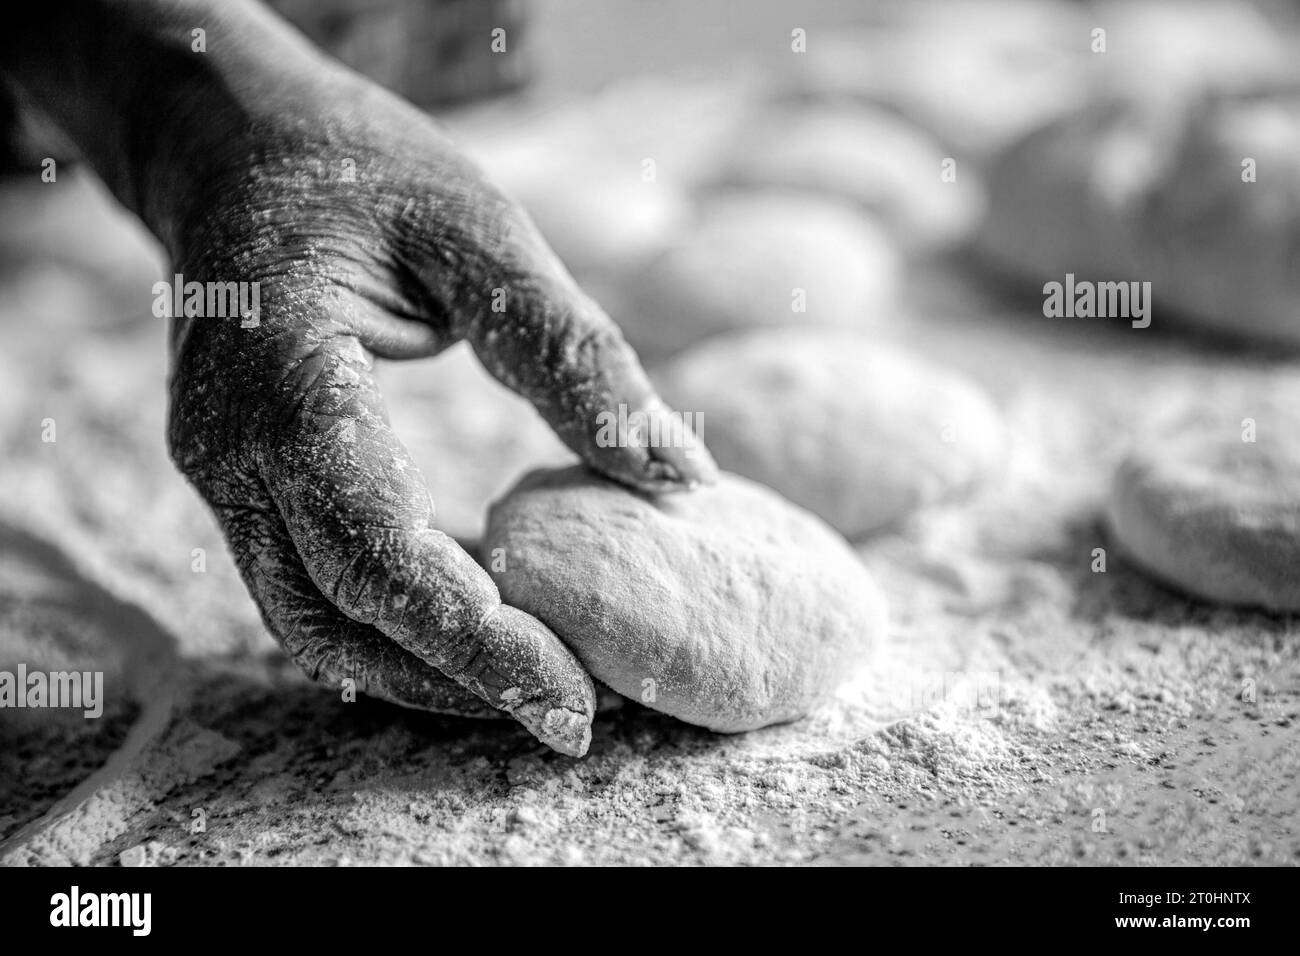 Womans hands rolling dough for pies. Baking at home. Homemade cakes dough in the women's hands. Process of making pies. Black and white Stock Photo